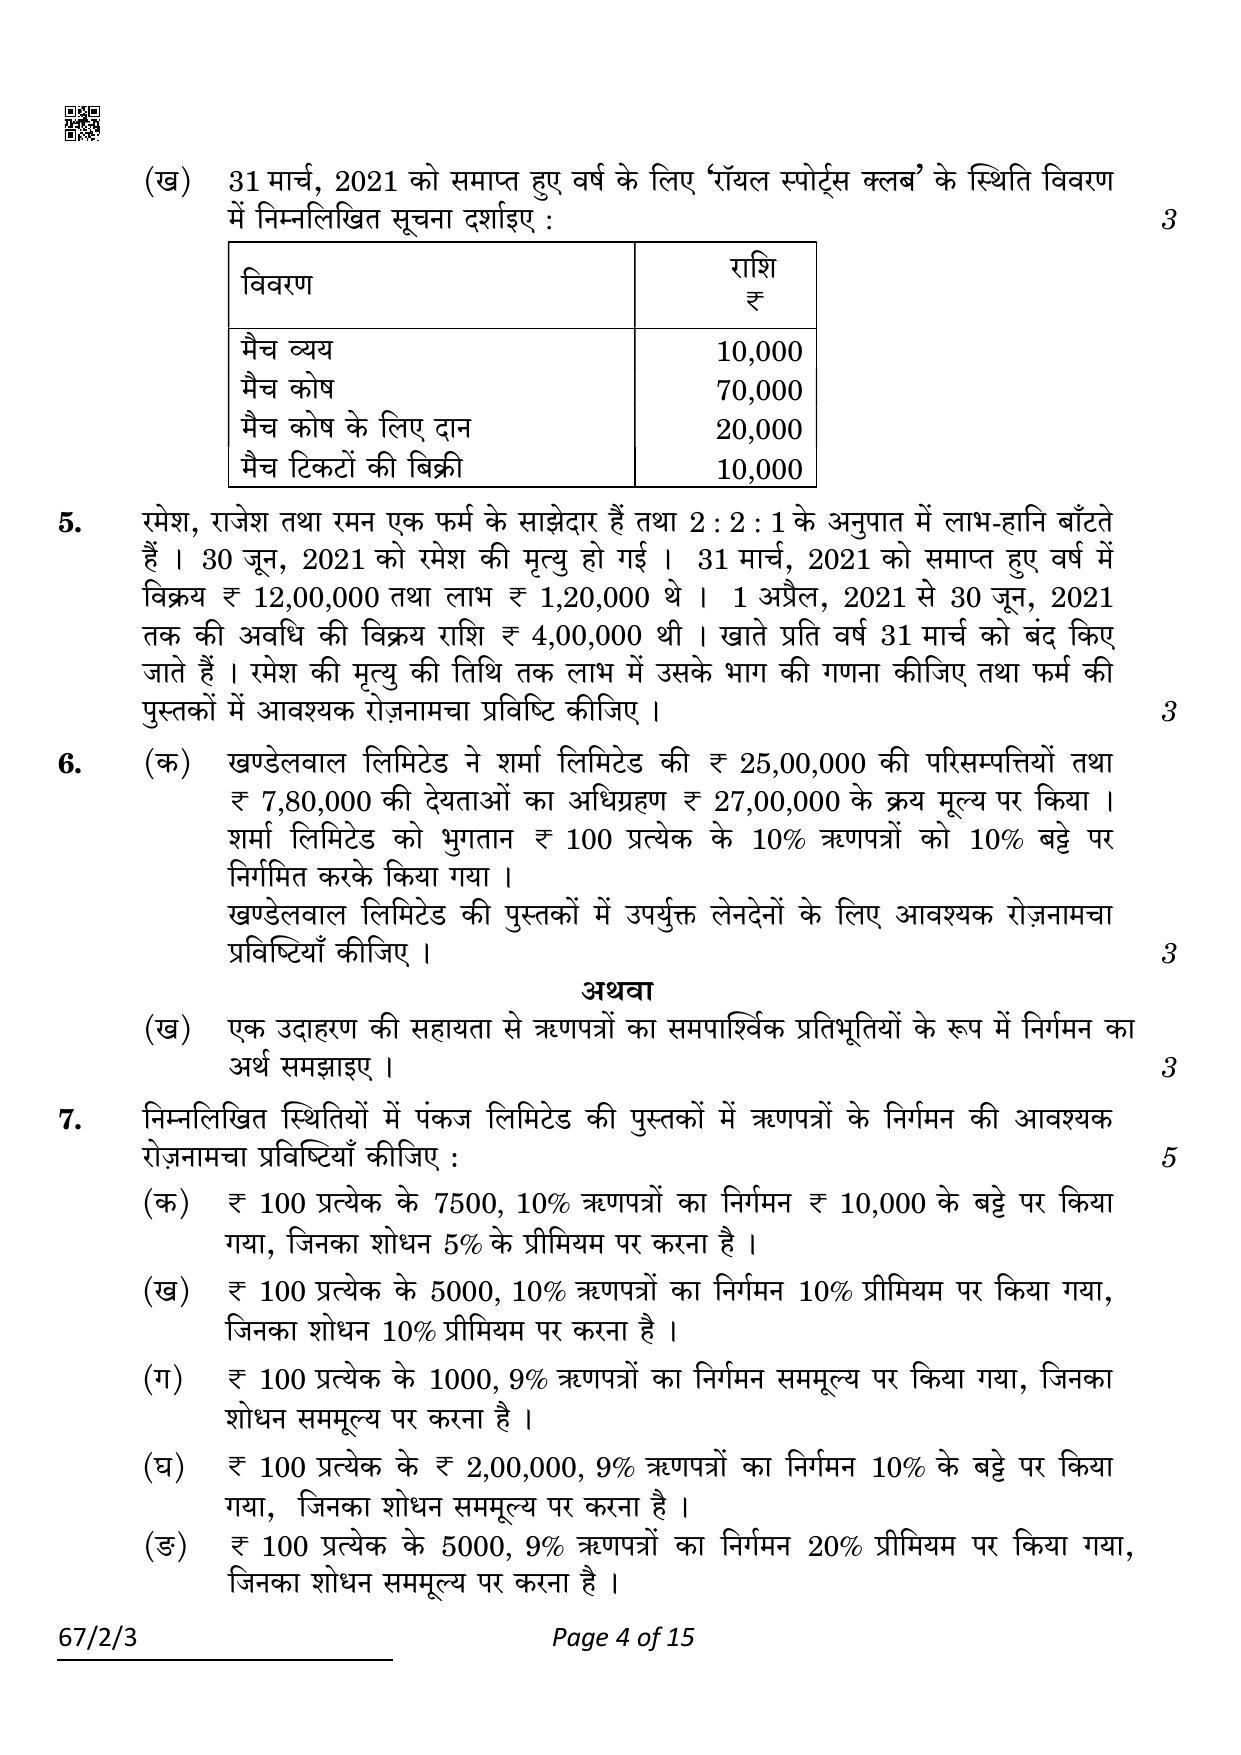 CBSE Class 12 67-2-3 Accountancy 2022 Question Paper - Page 4